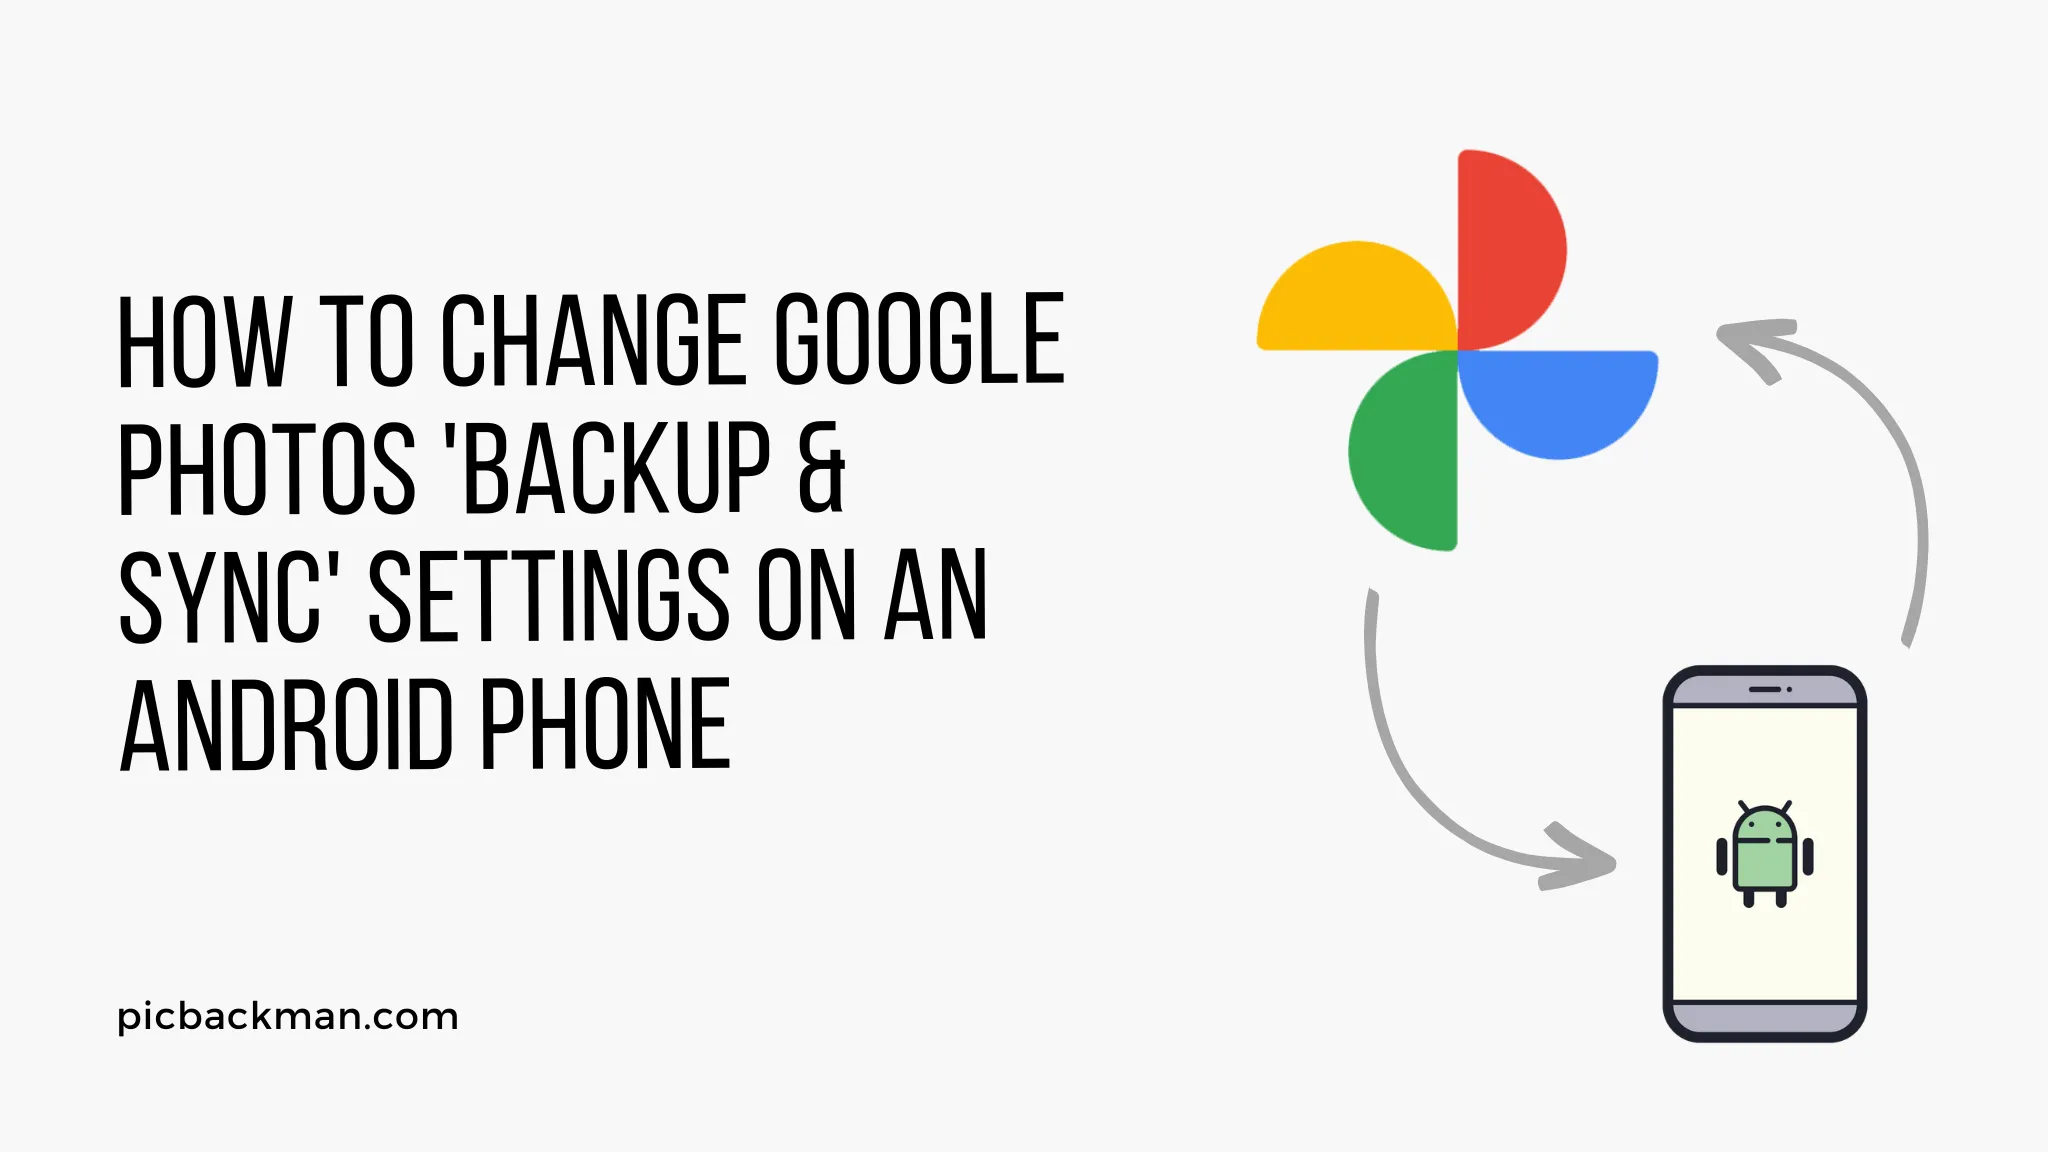 How to Change Google Photos 'Backup & Sync' Settings on an Android Phone?